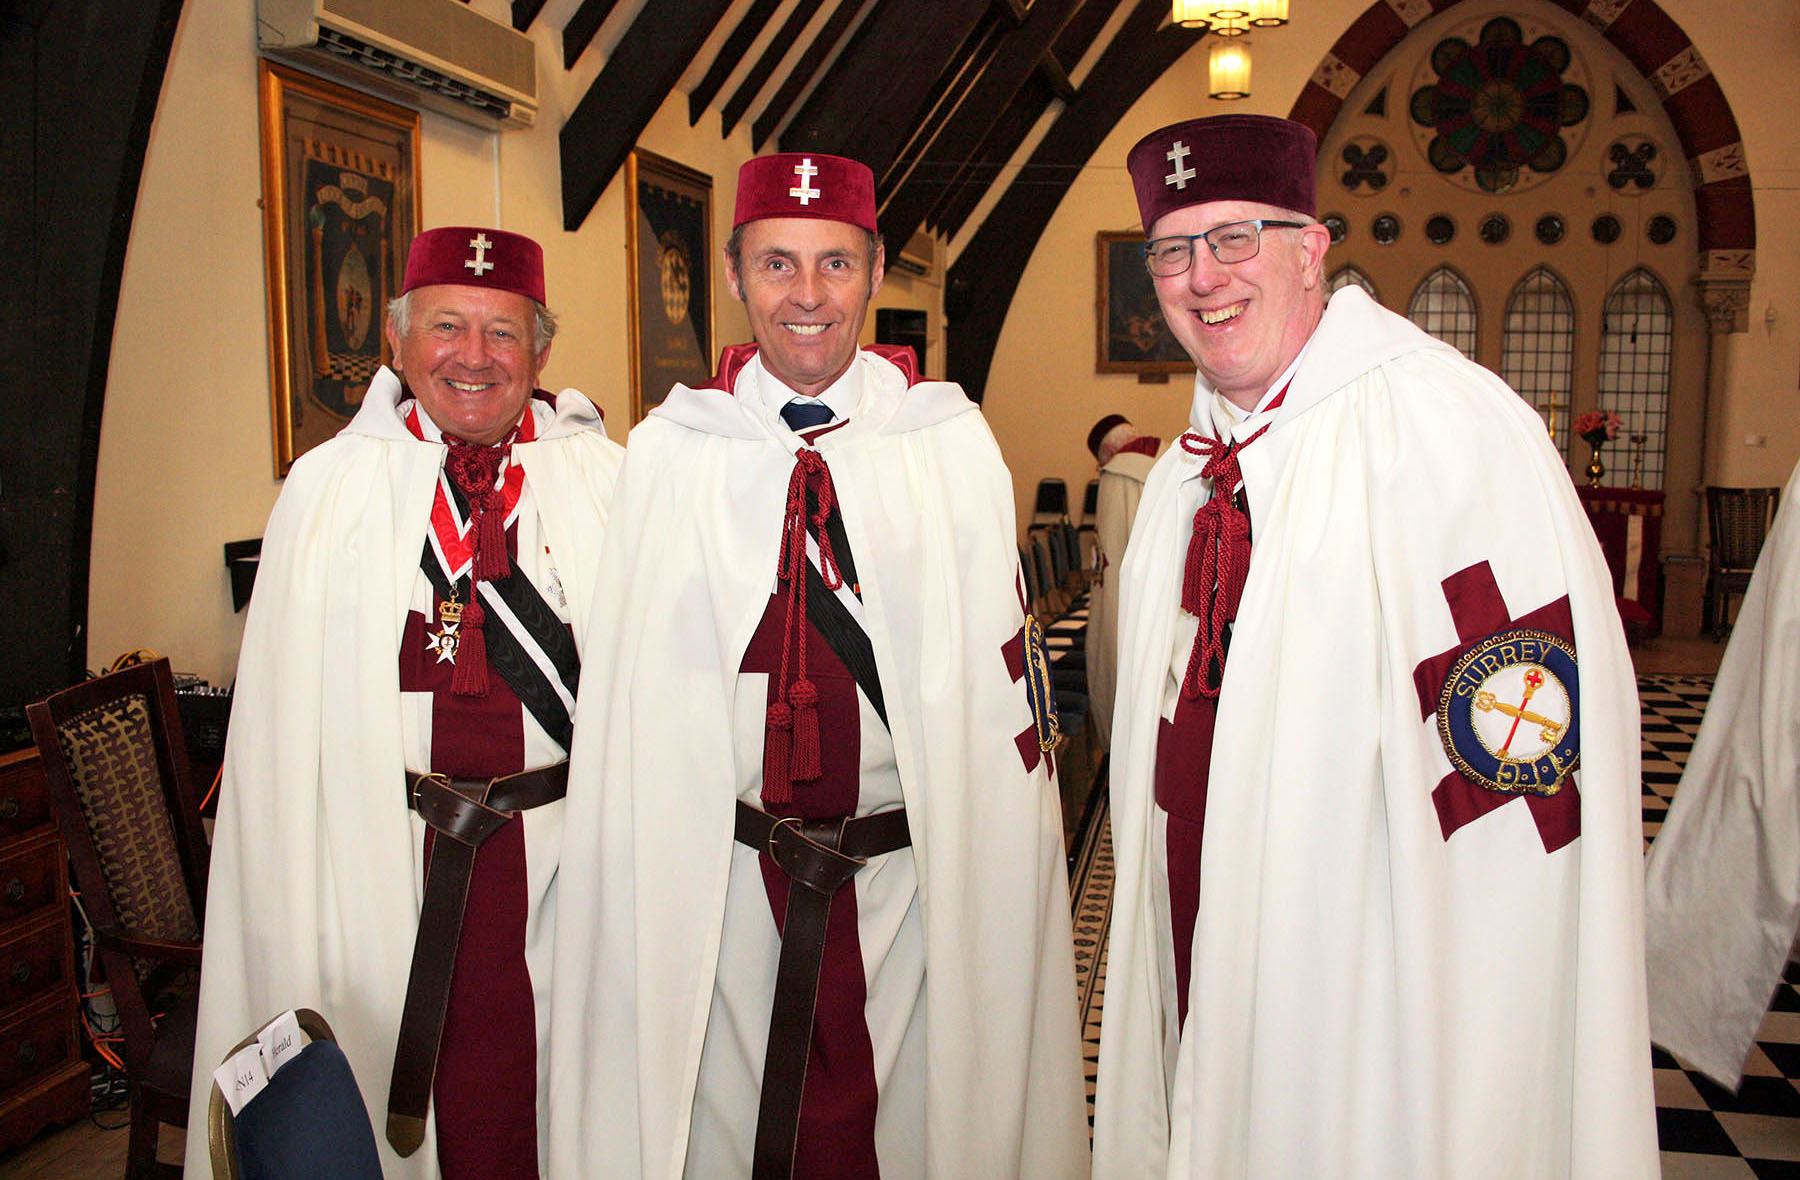 The 2019 Annual Meeting of the Provincial Priory of Surrey